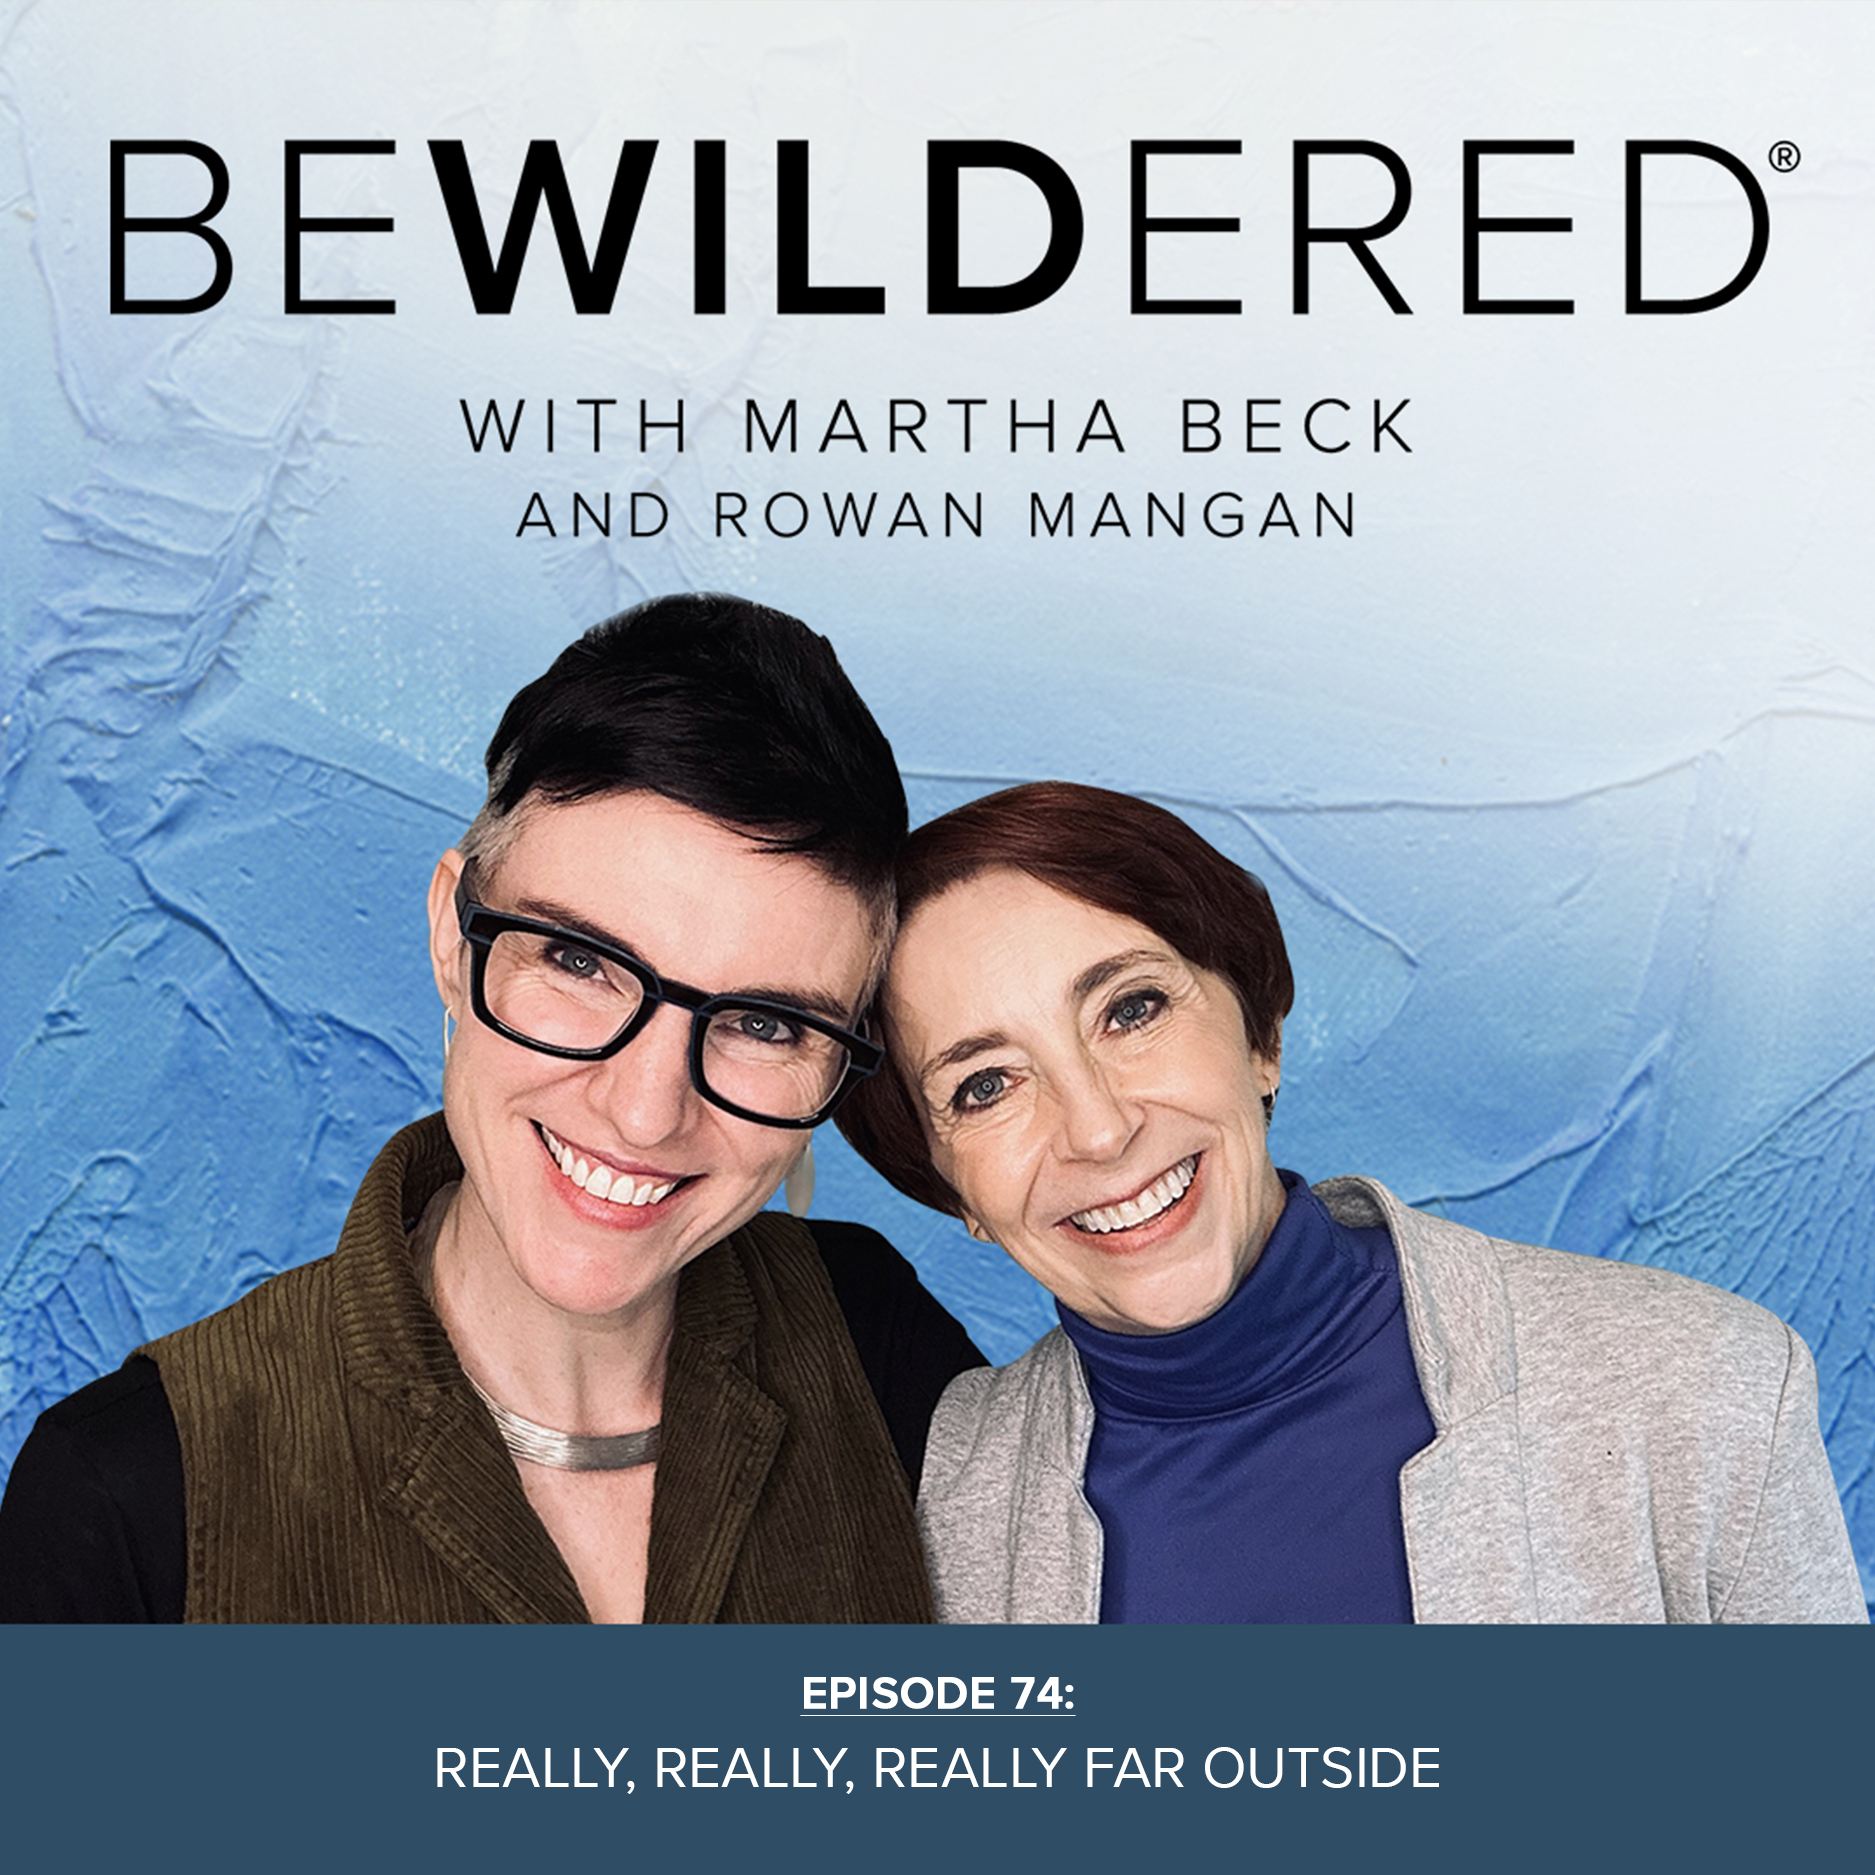 Image for Episode #74 Really, Really, Really Far Outside for the Bewildered Podcast with Martha Beck and Rowan Mangan